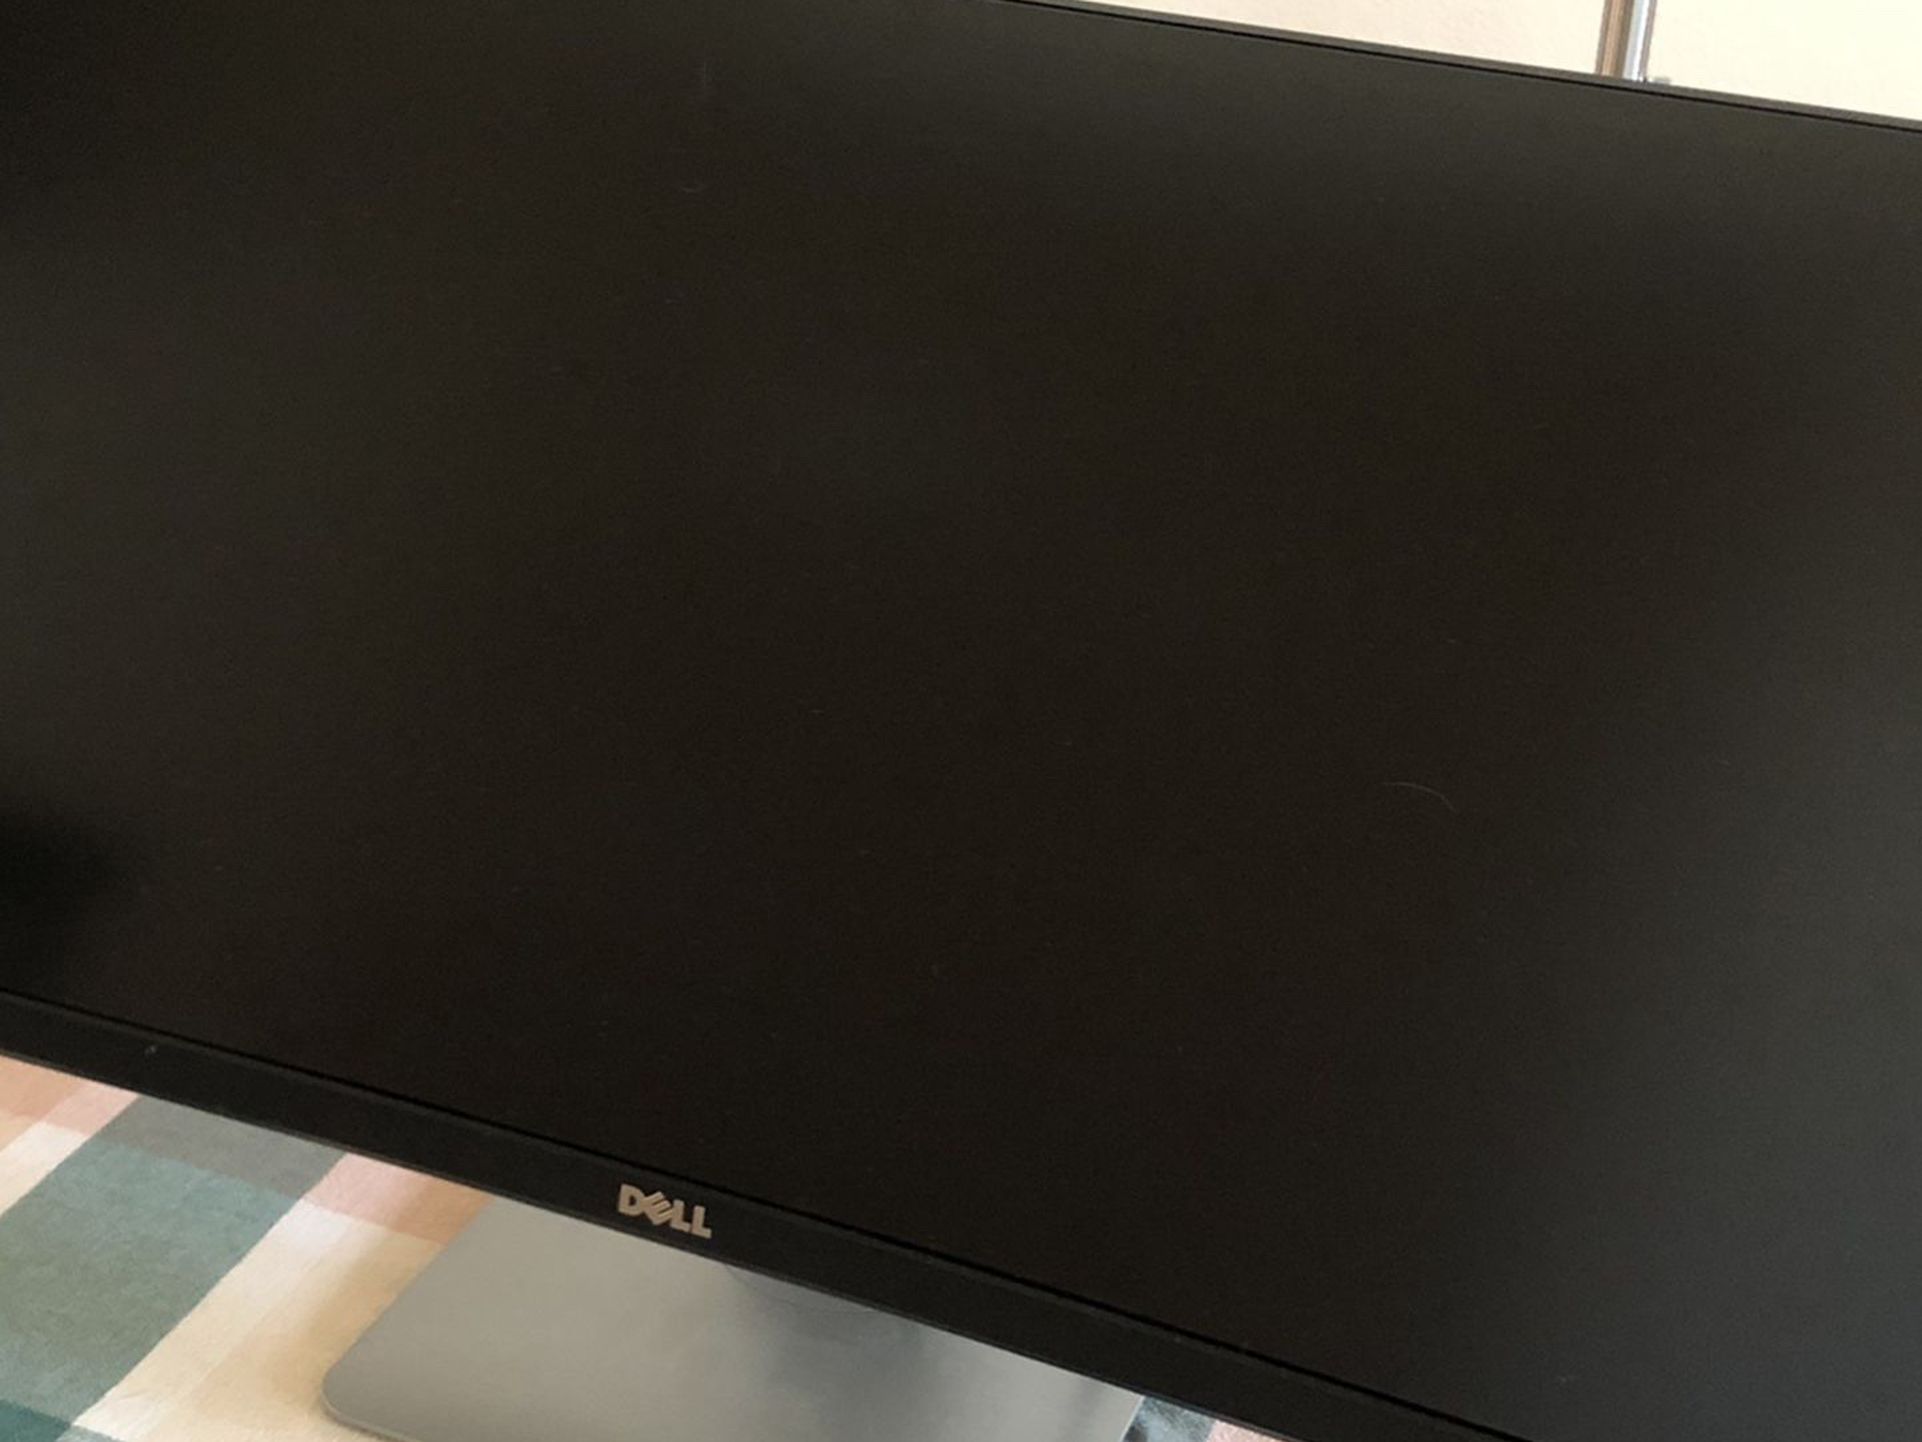 Dell U3415W Widescreen Curved LED Monitor